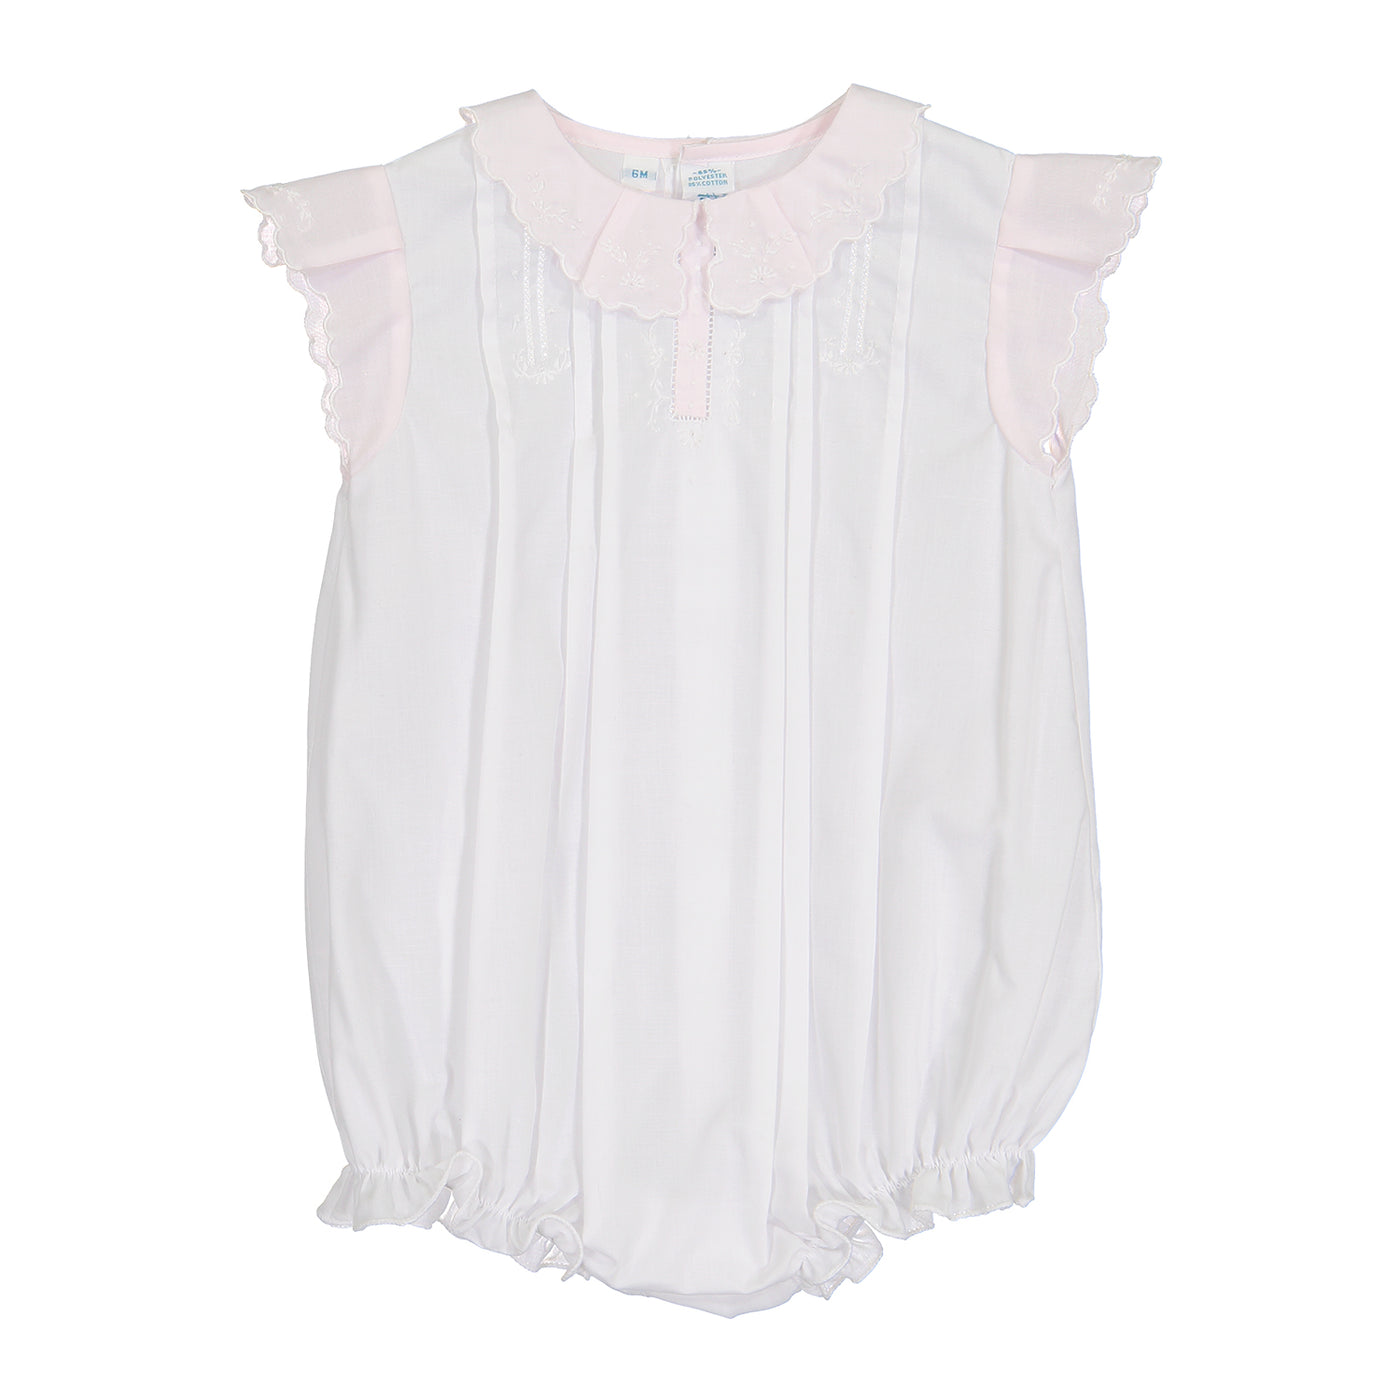 Vintage Fly Sleeve Romper- White with Pink Details